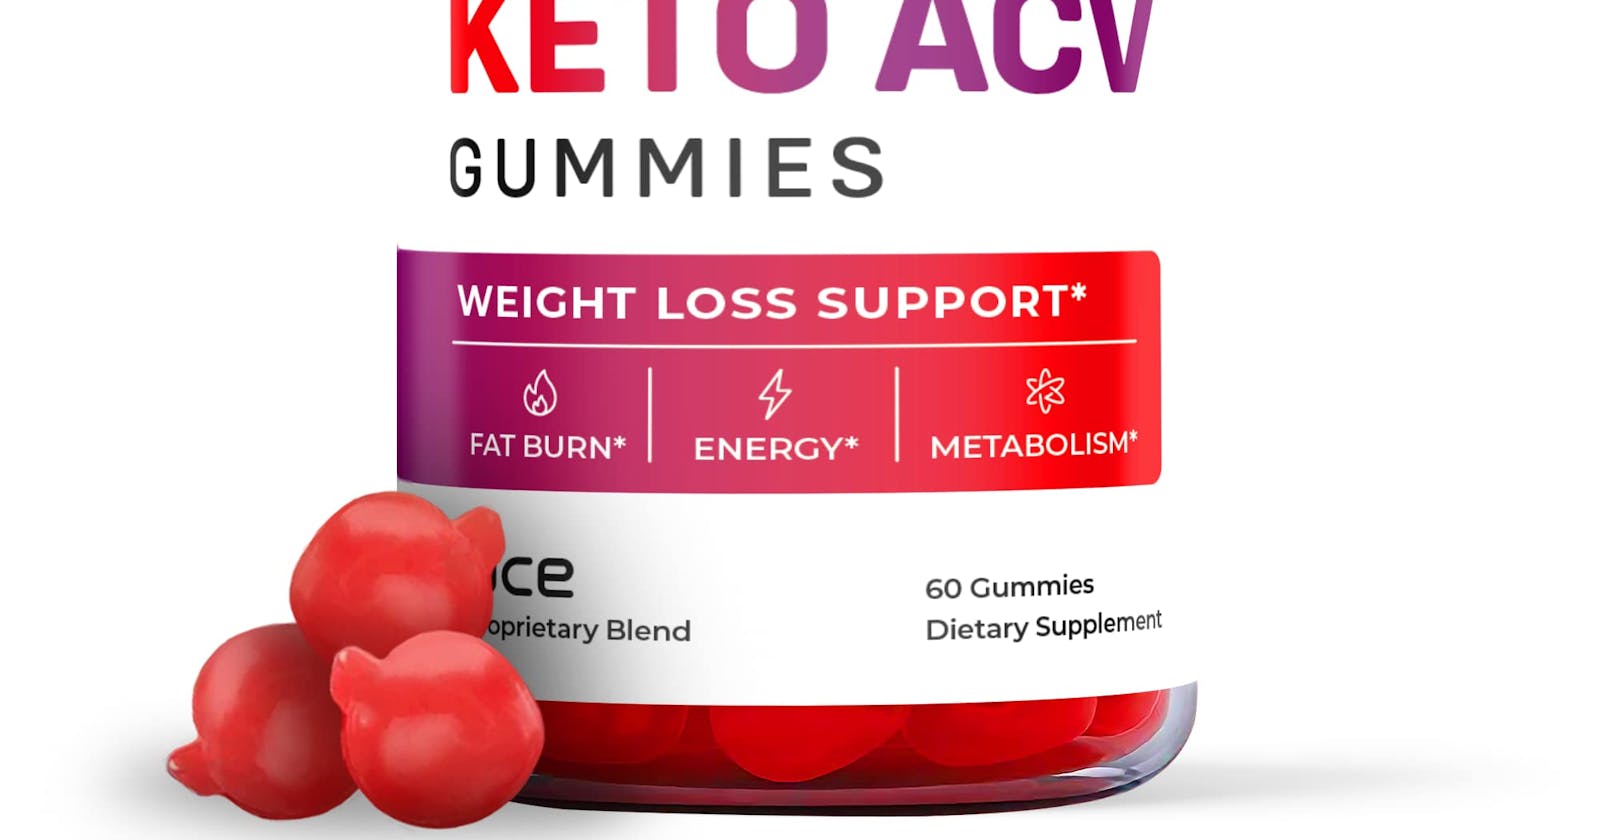 Ace Keto ACV Gummies (Review 2023) Read Daily Dose Benefits, Safe Effective & Shocking Results?